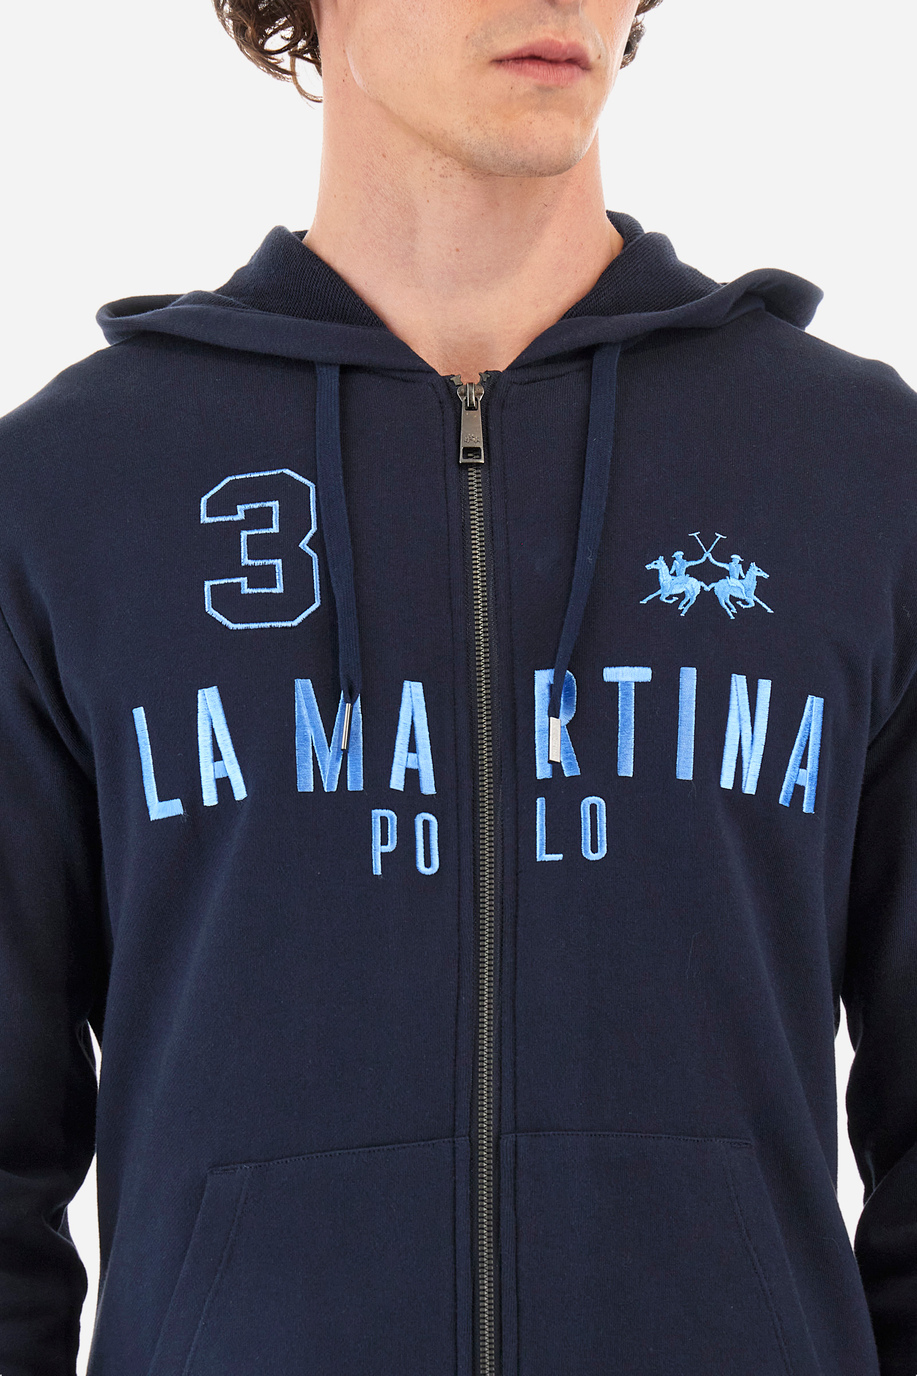 Men's casual and sporty clothing | La Martina